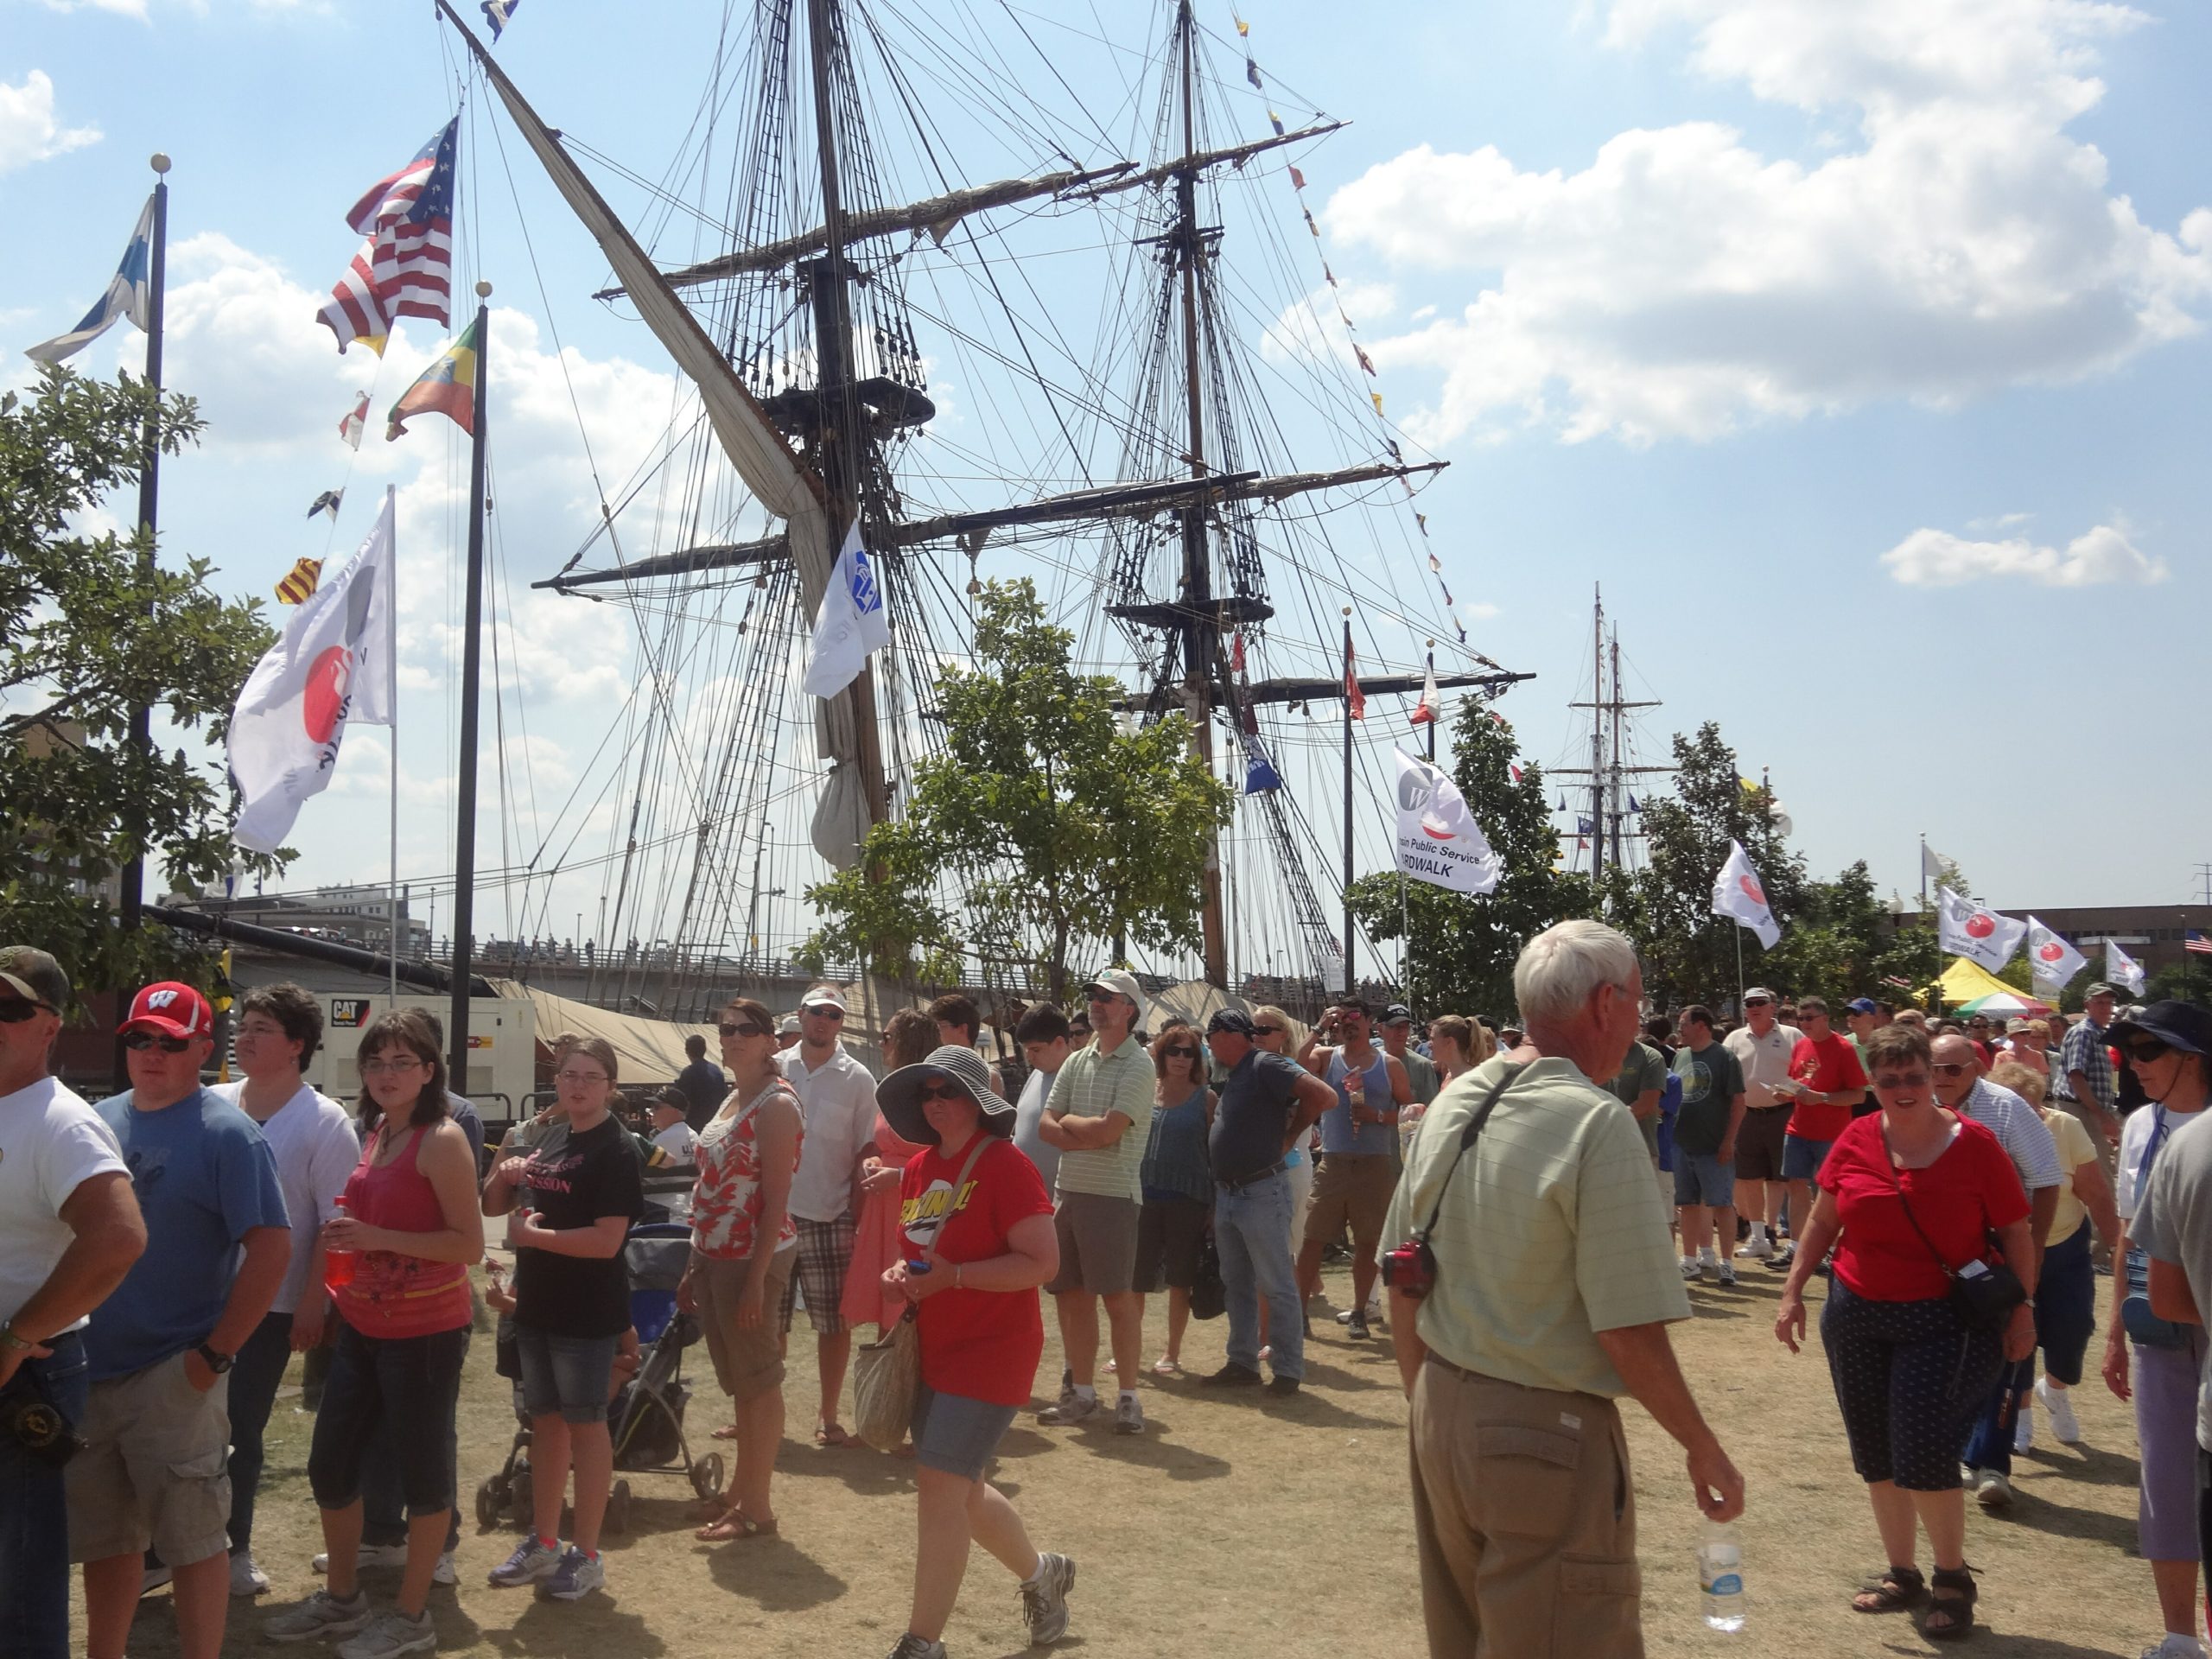 Sea Shanties and Maritime Music go hand-in-hand with tall ships at Nicolet Bank Tall Ships Festival.